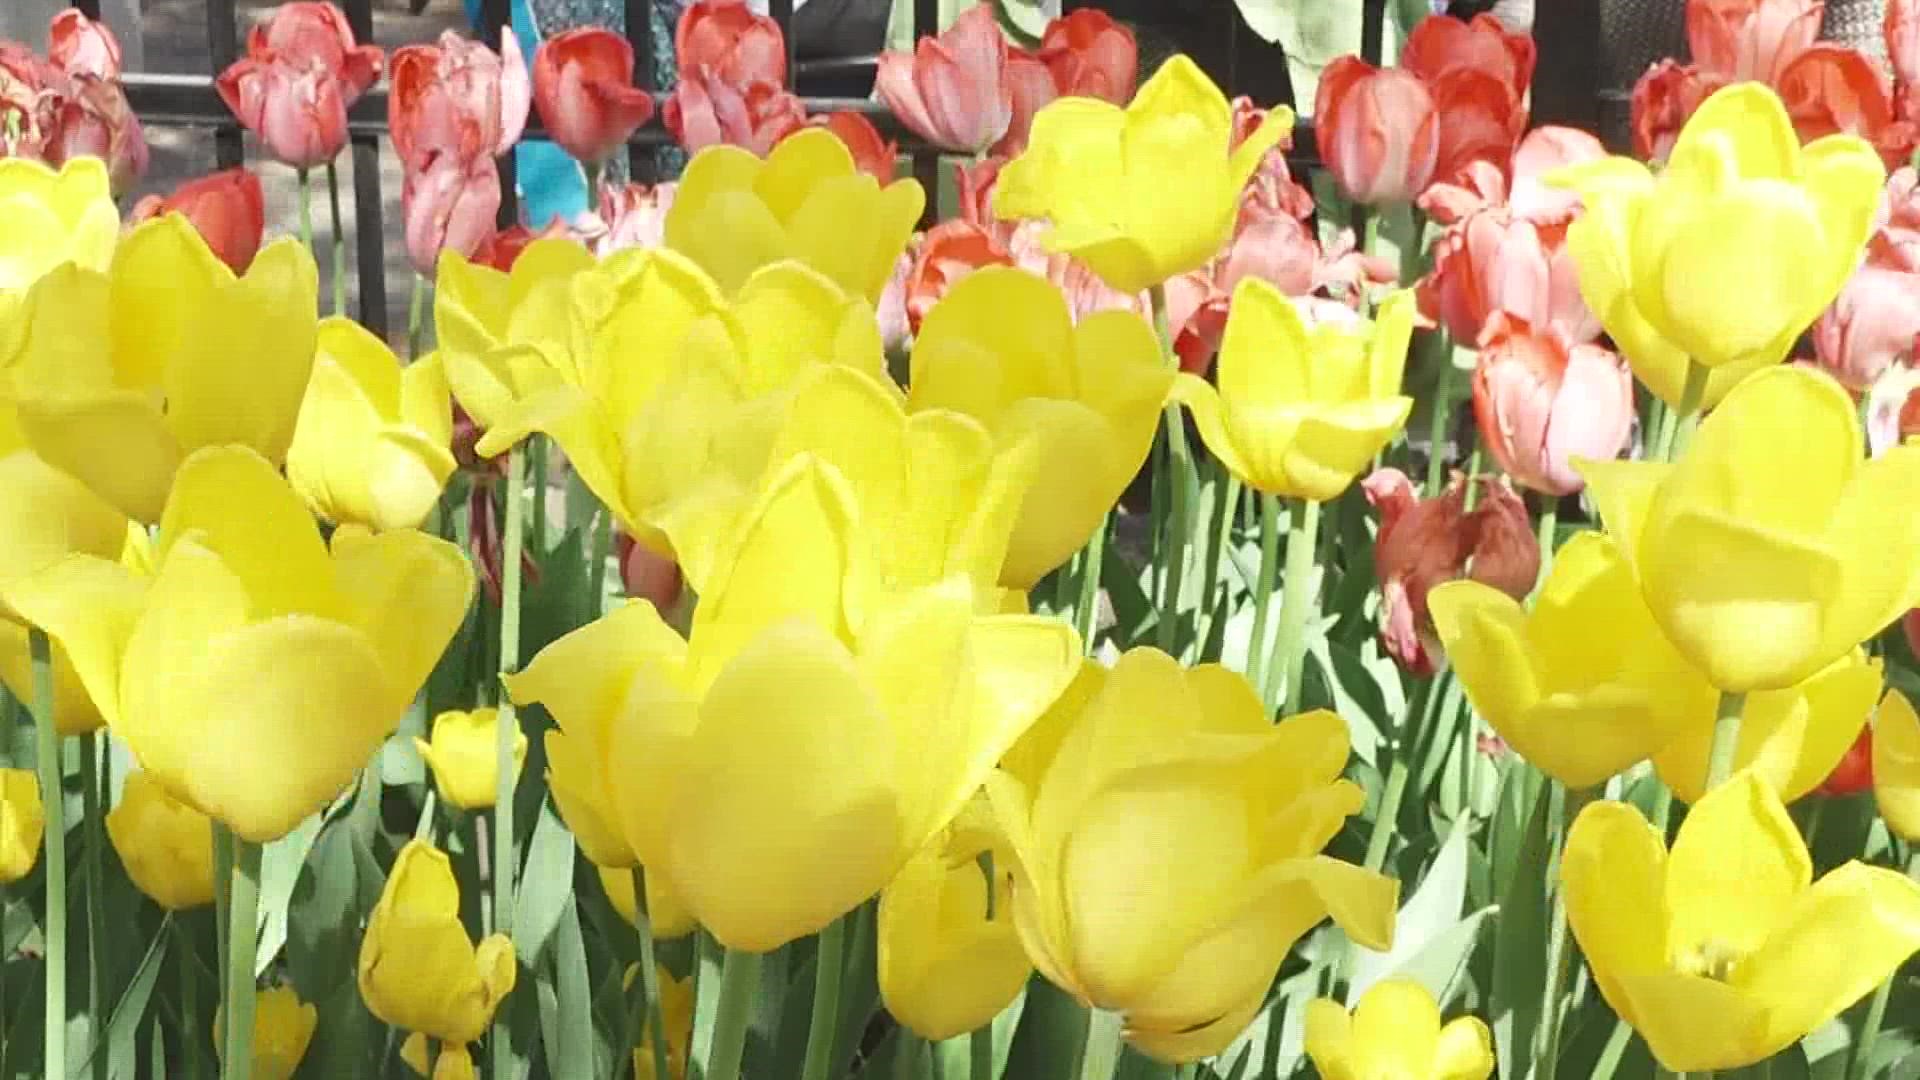 The Tulip Immersion Garden will elevate the tulips to new heights by raising them to eye level in this first-of-it's-kind-in-the-US attraction.